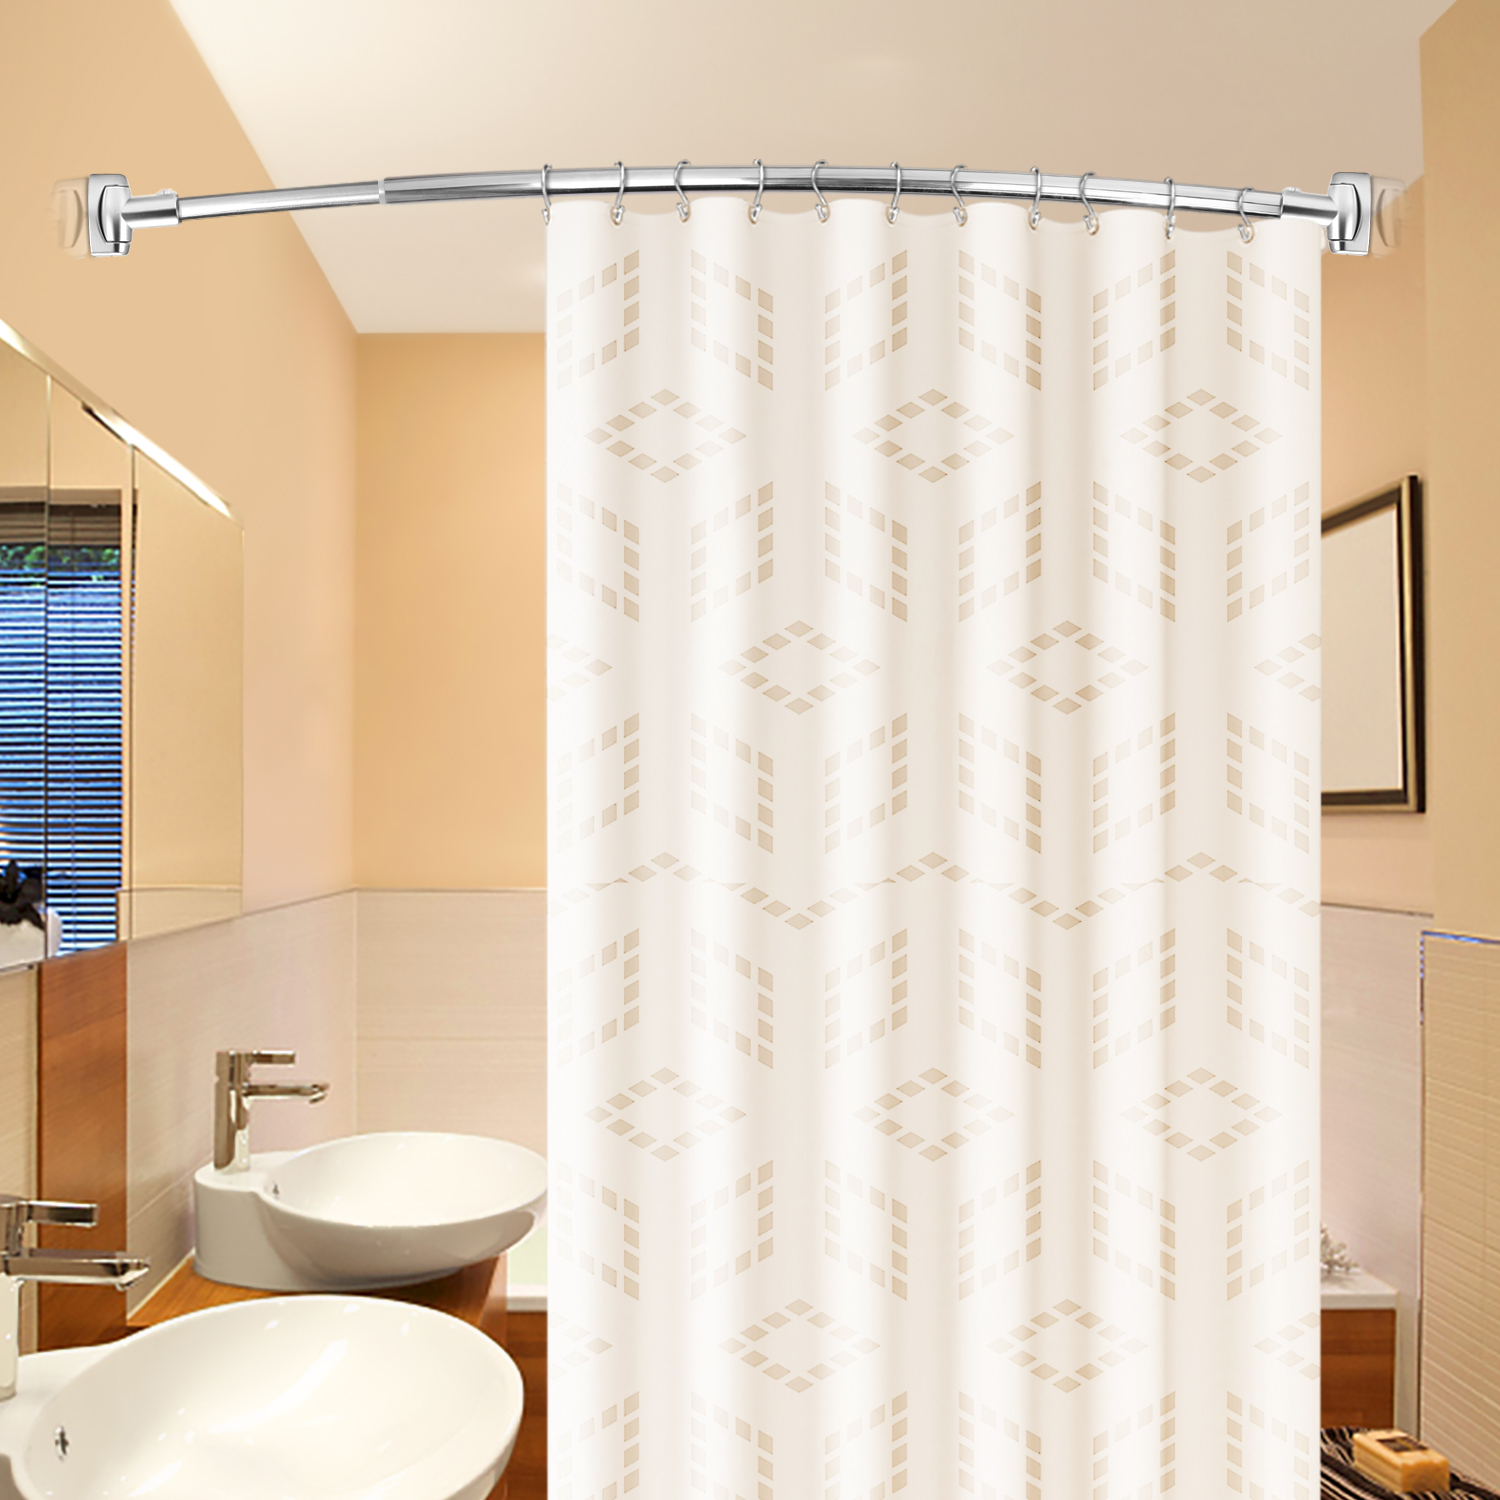 Exquisite Chrome Adjustable Rounded Bowed Stainless Steel Shower Rods Customized for Bathtub